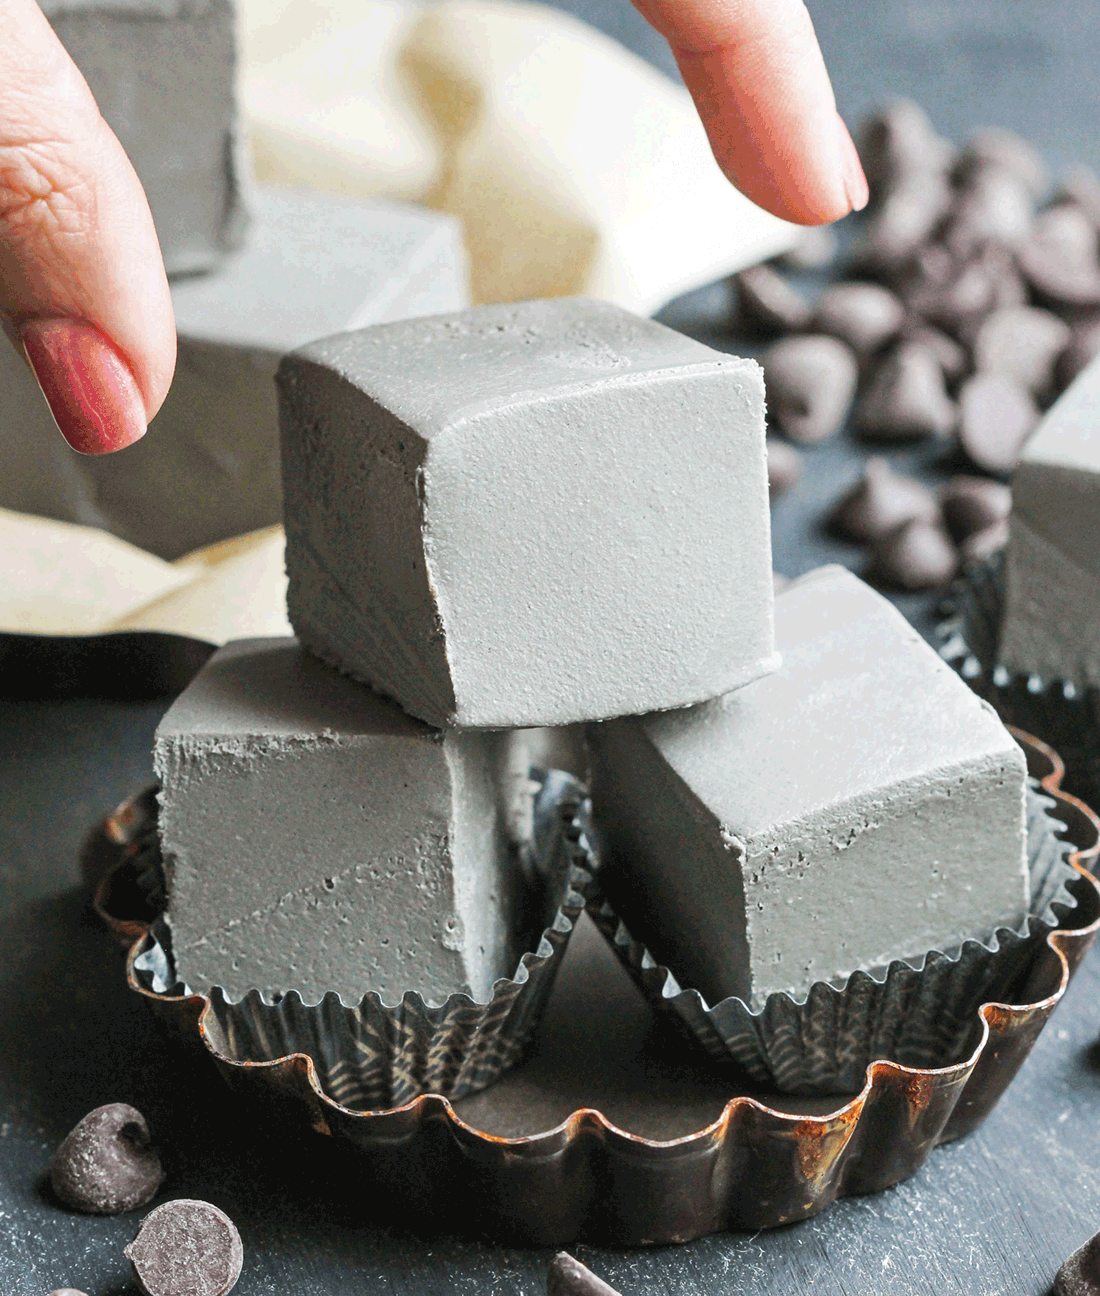 Black Velvet is just like red velvet, only black! This Healthy Raw Black Velvet Fudge is SUPER smooth, creamy, sweet, and chocolatey. You’d never know it’s all natural, refined sugar free, low carb, gluten free, dairy free, AND vegan. Can you guess the secret ingredient? -- Healthy Dessert Recipes with low calorie, low fat, and high protein options at the Desserts With Benefits Blog (www.DessertsWithBenefits.com)